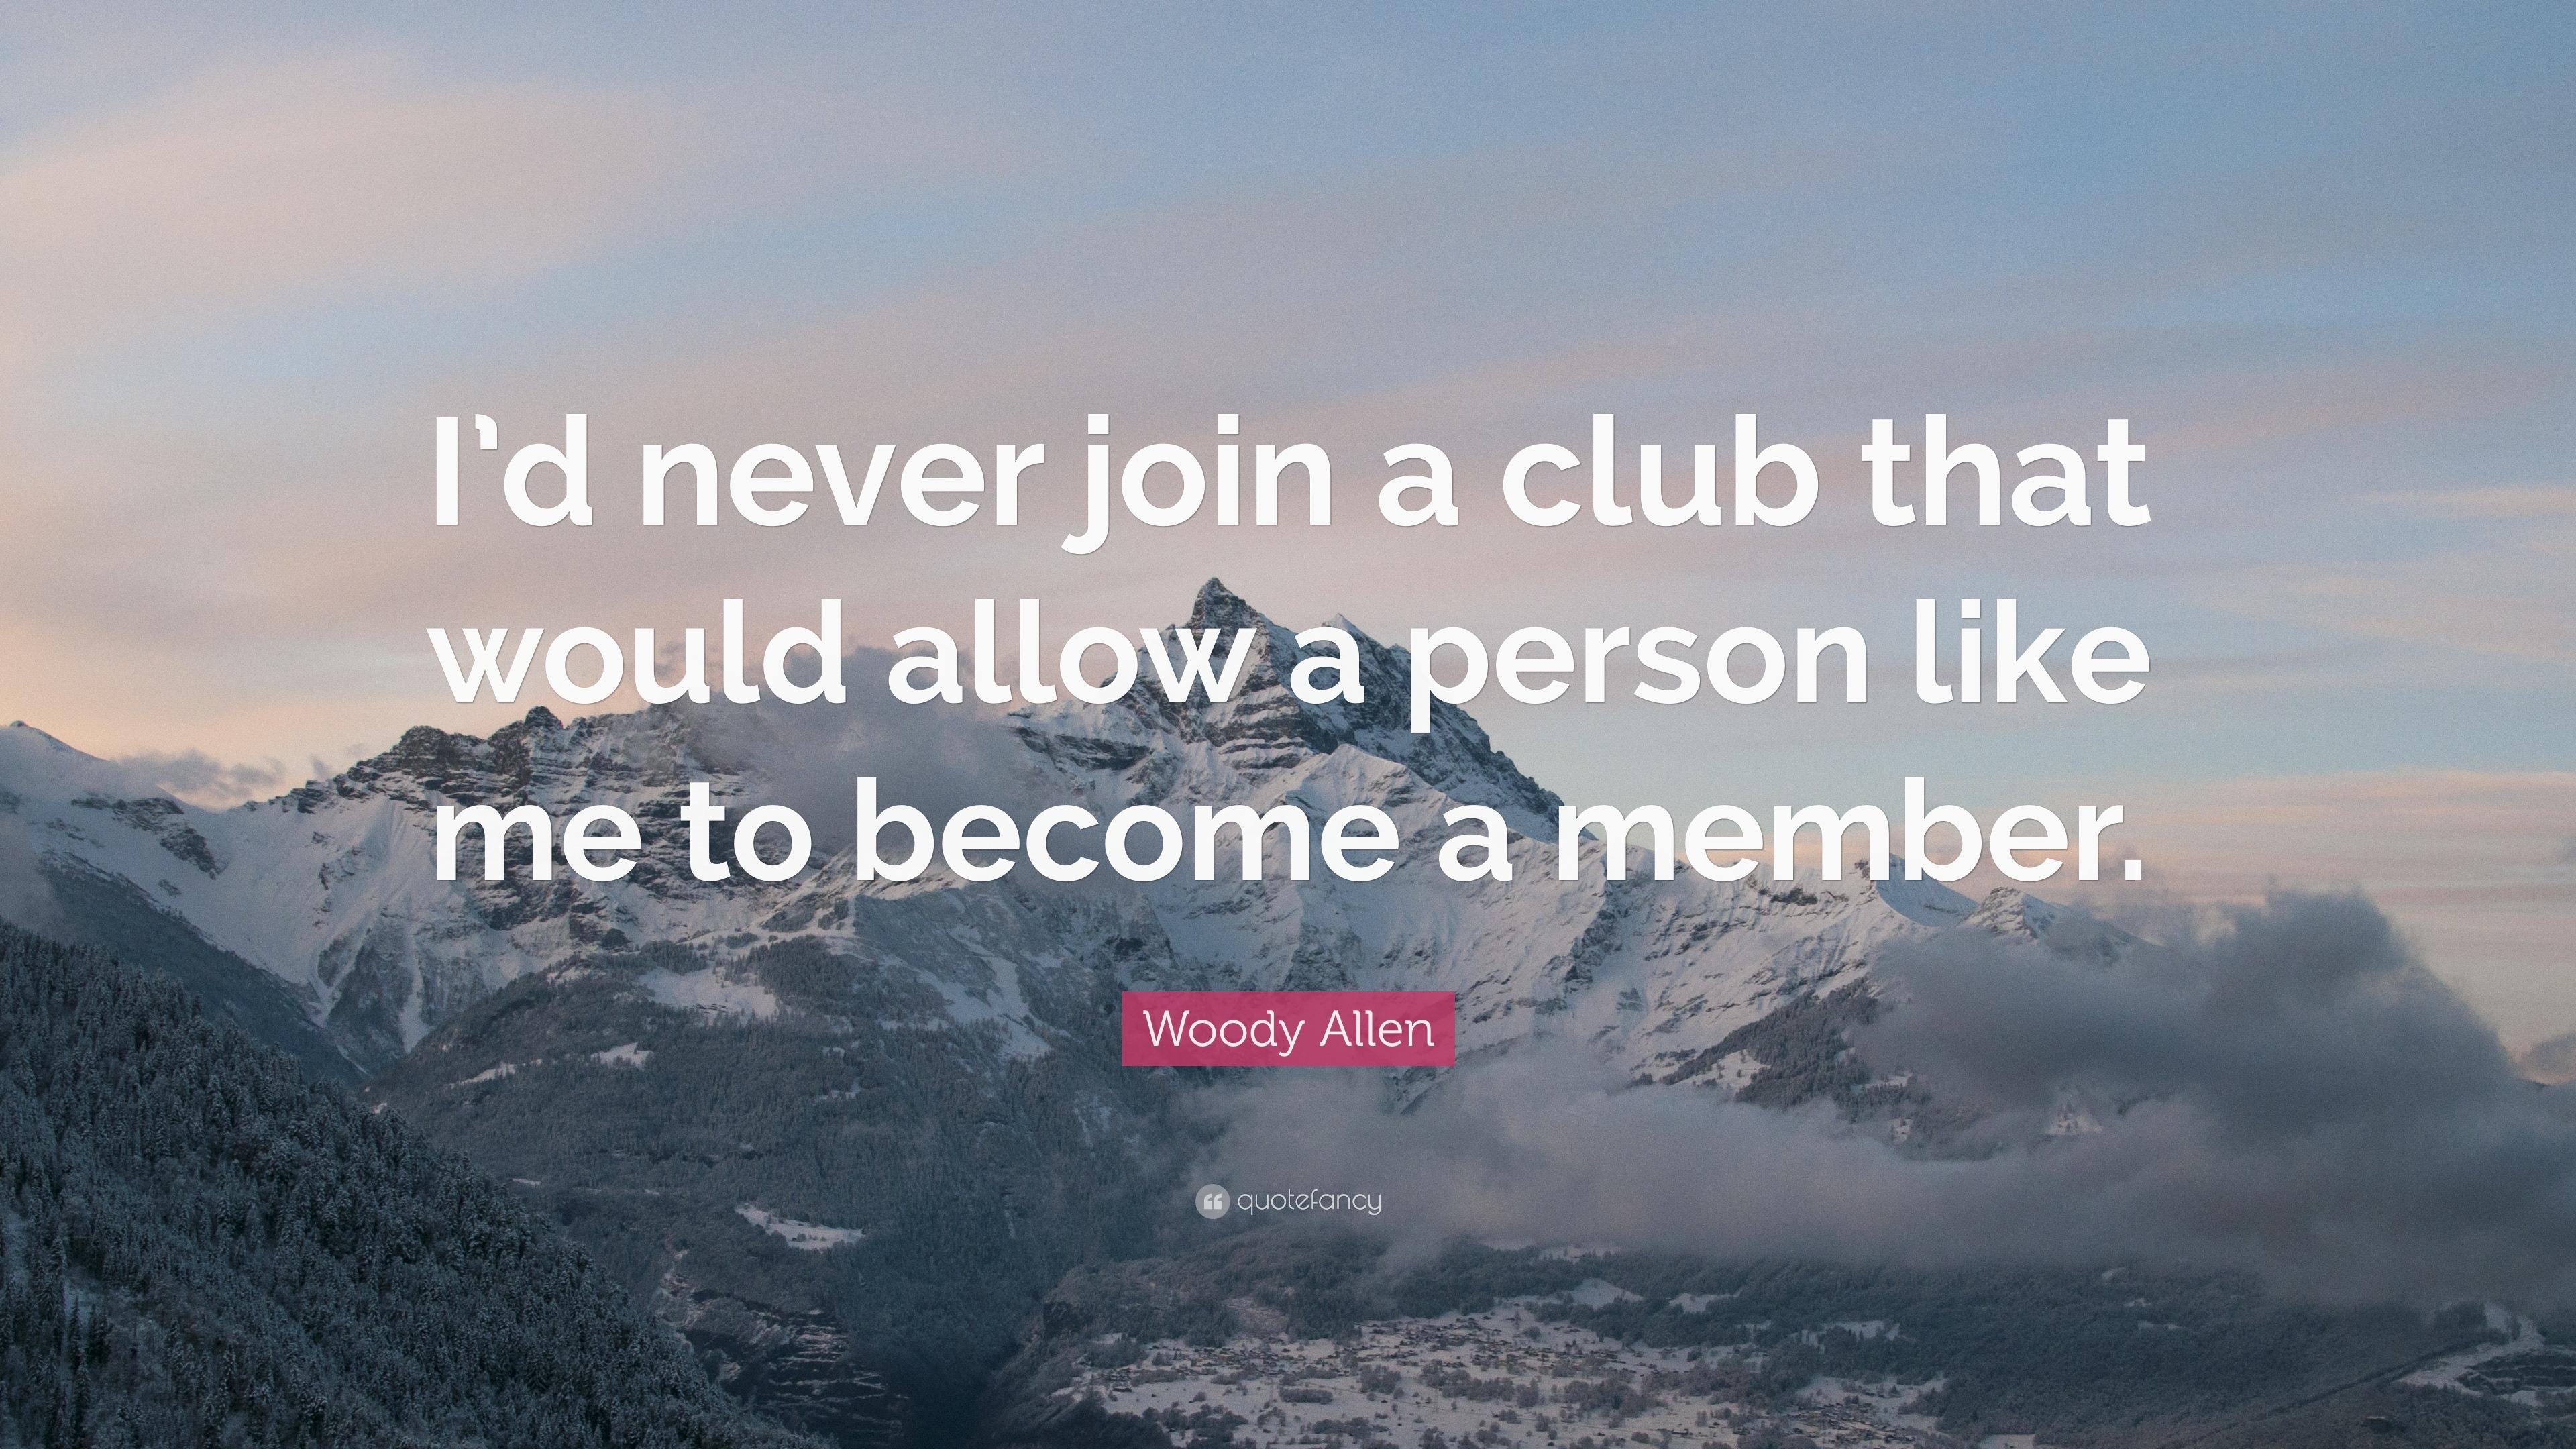 Woody Allen Quote: “I’d never join a club that would allow a person ...